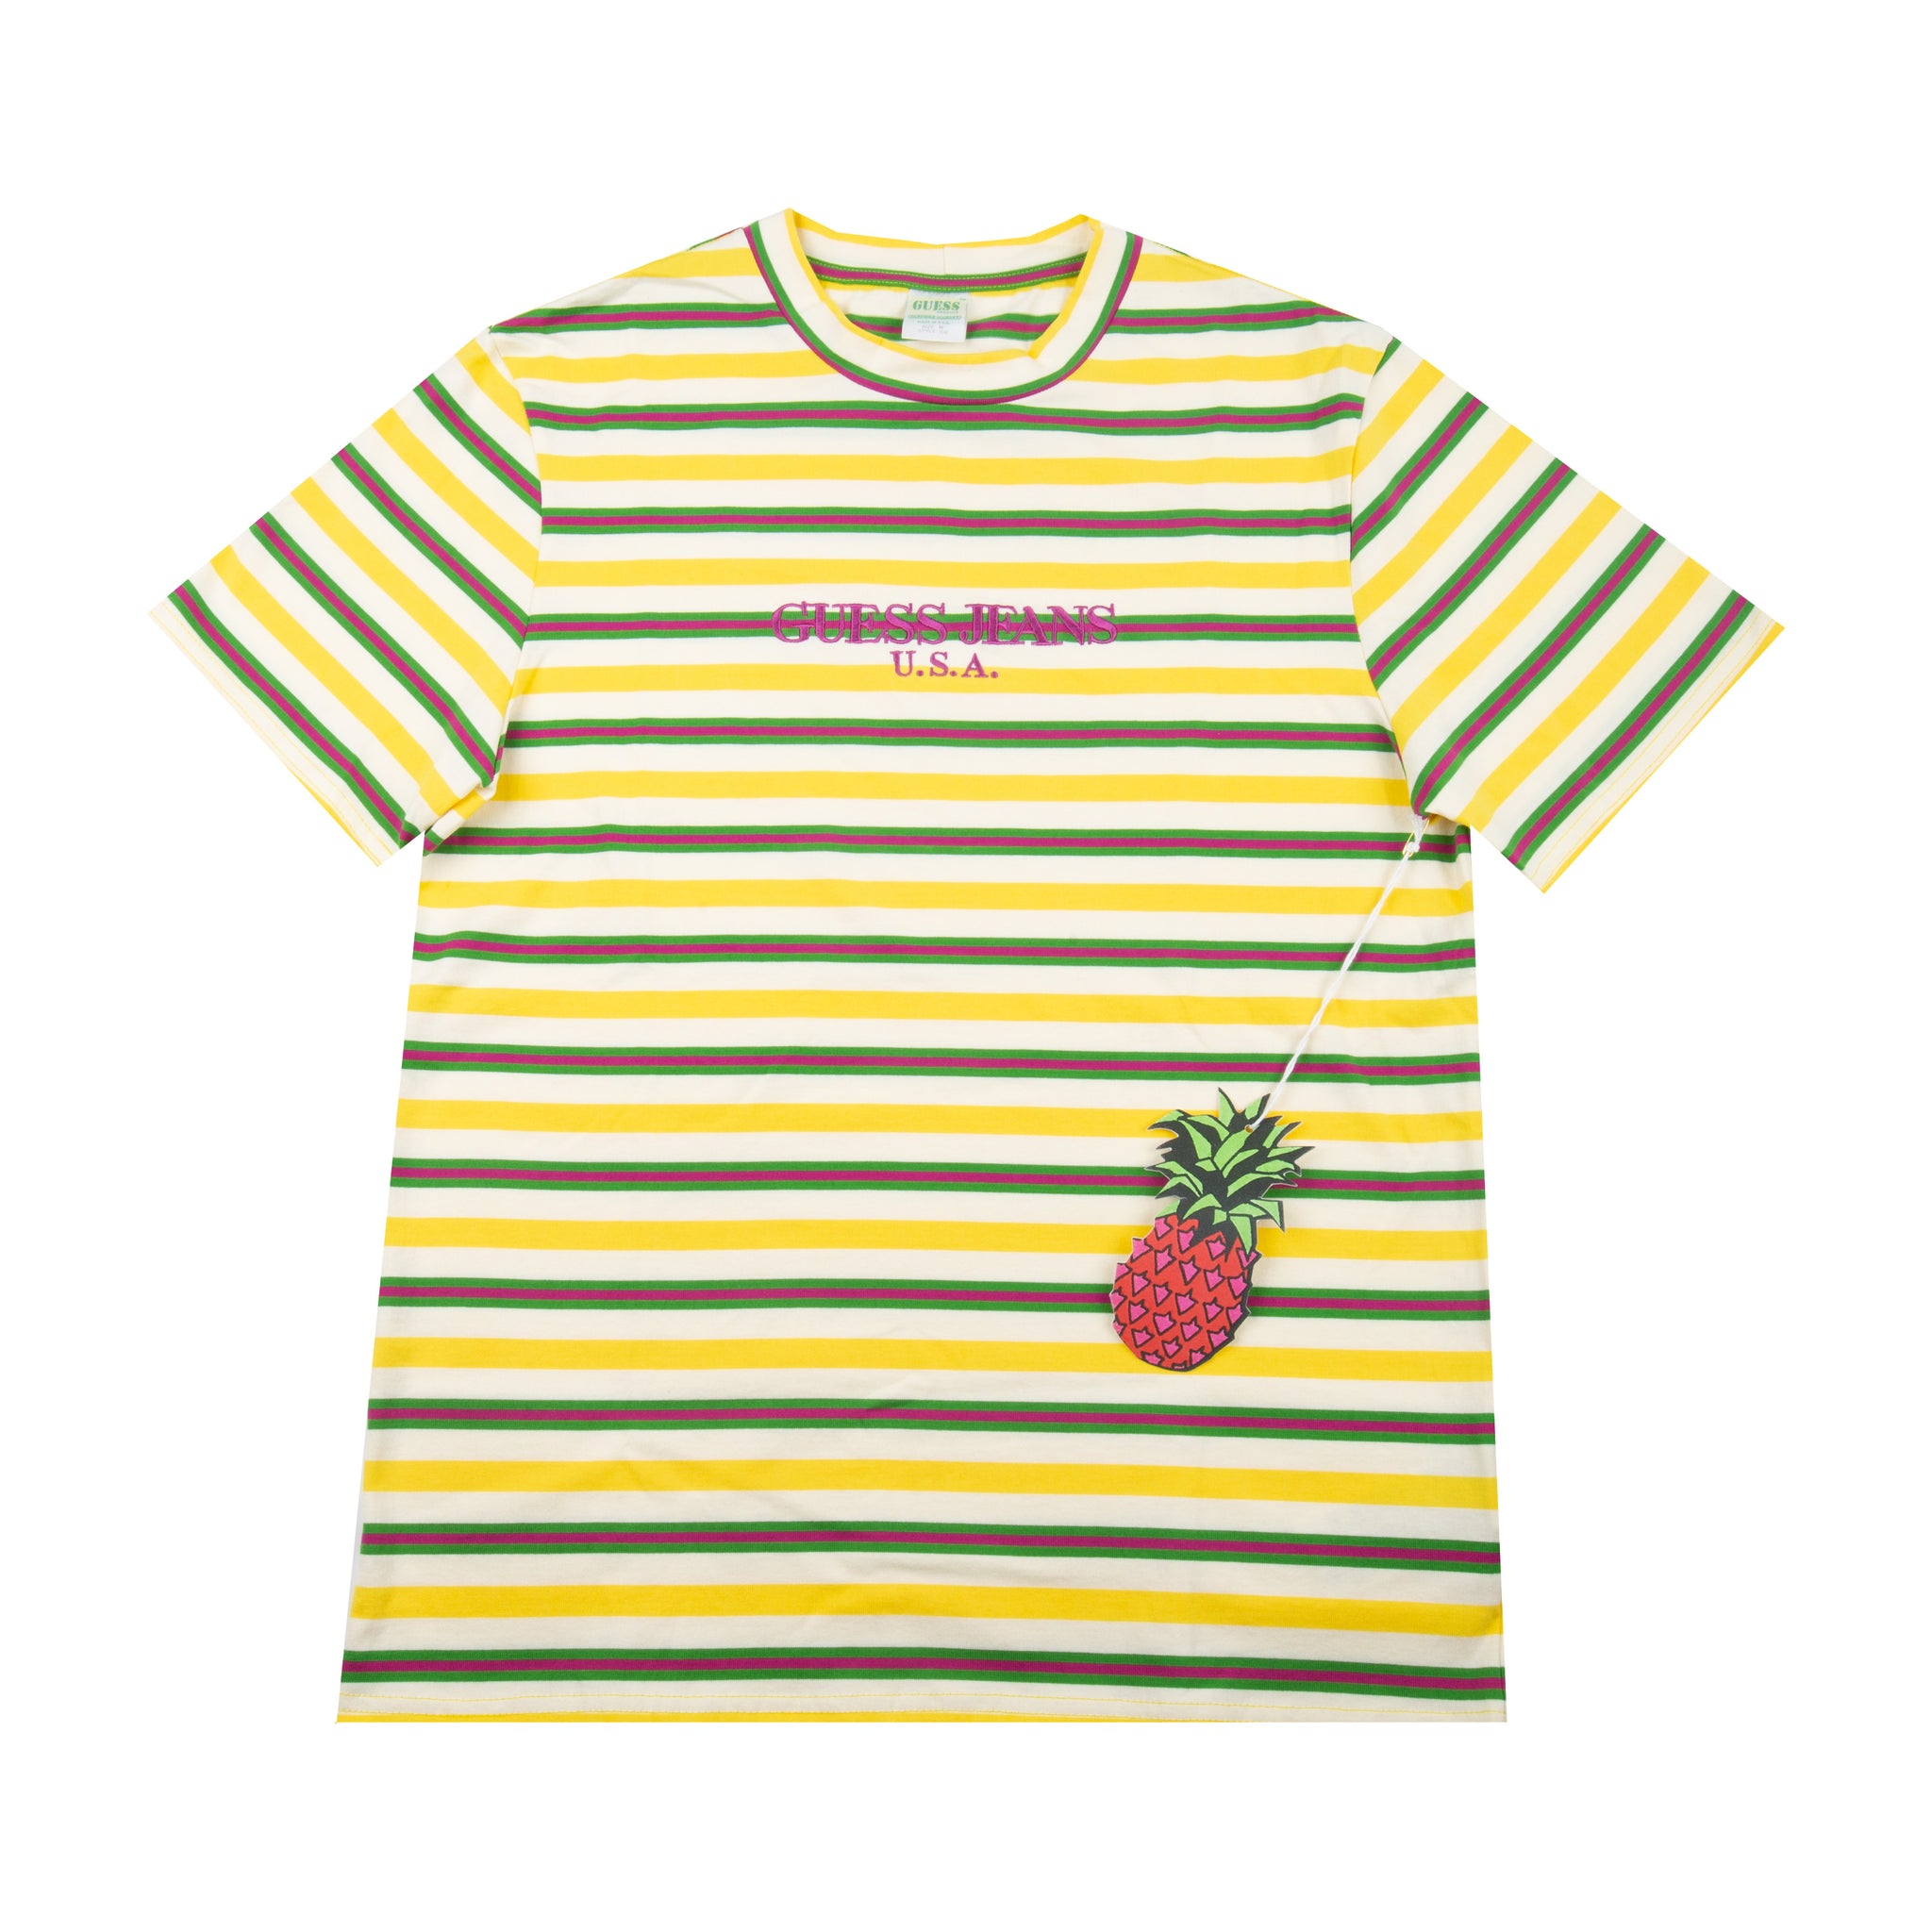 Guess Jeans Pineapple Striped Tee